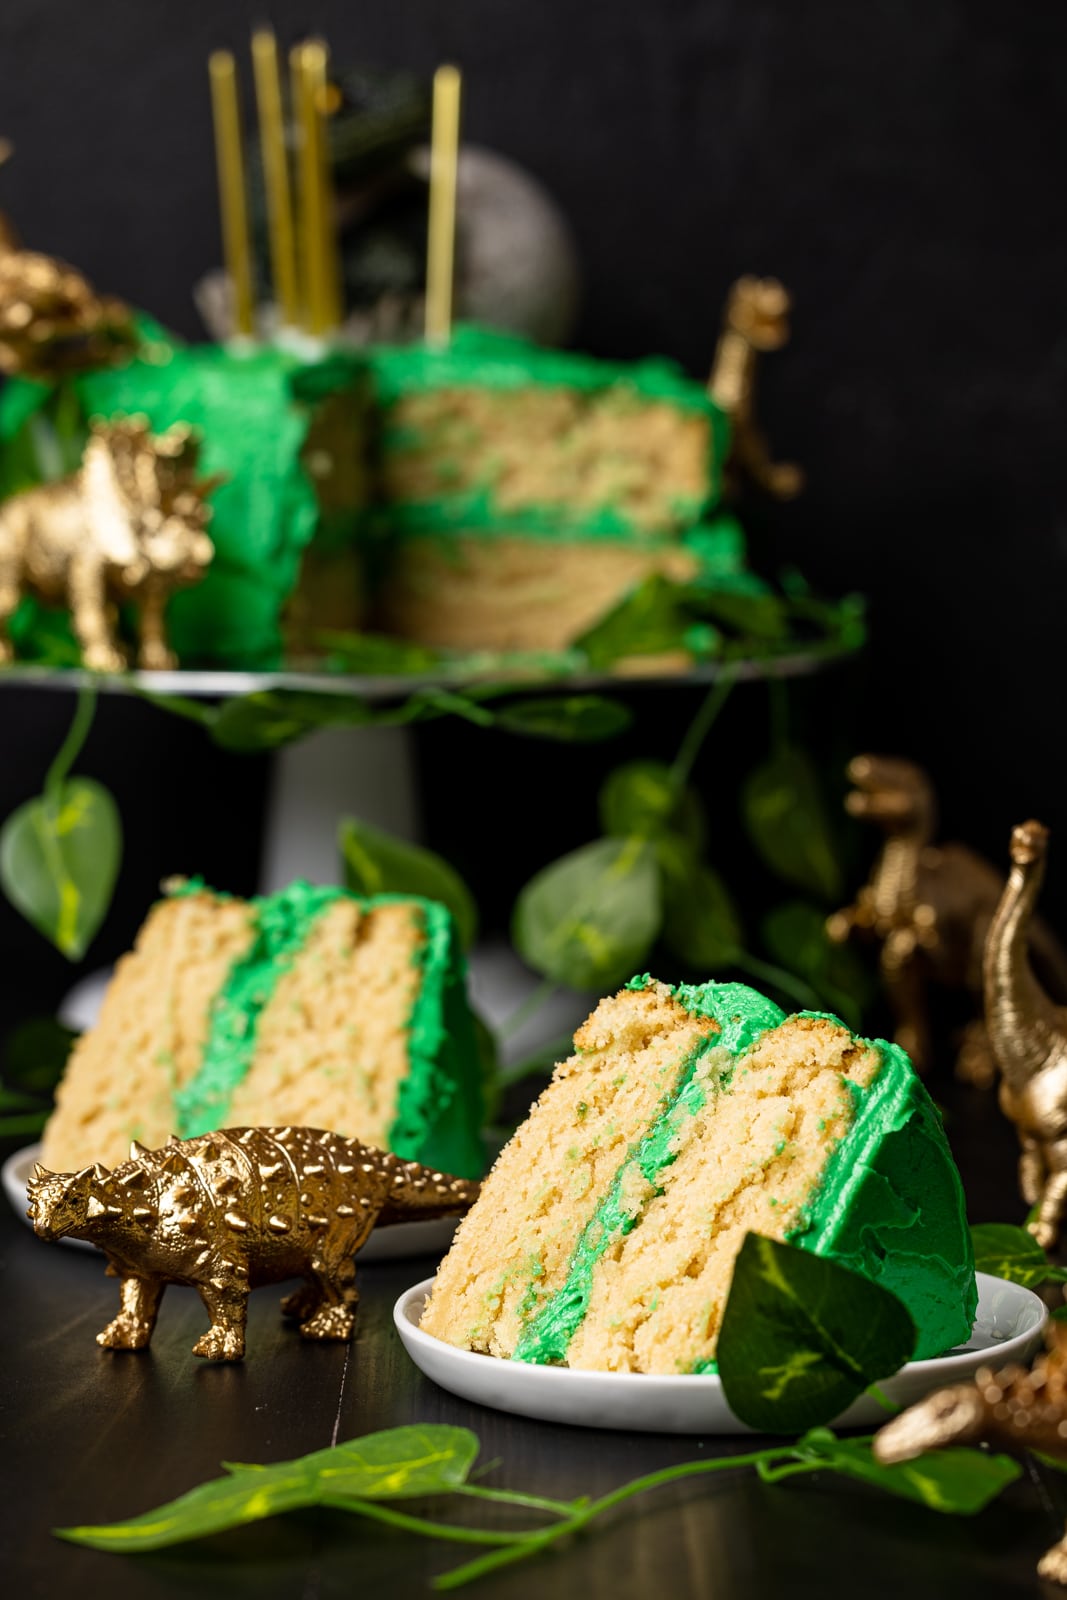 Two slices of cake on a white plate with the whole cake on a cake stand in the black background with gold toy dinosaurs.